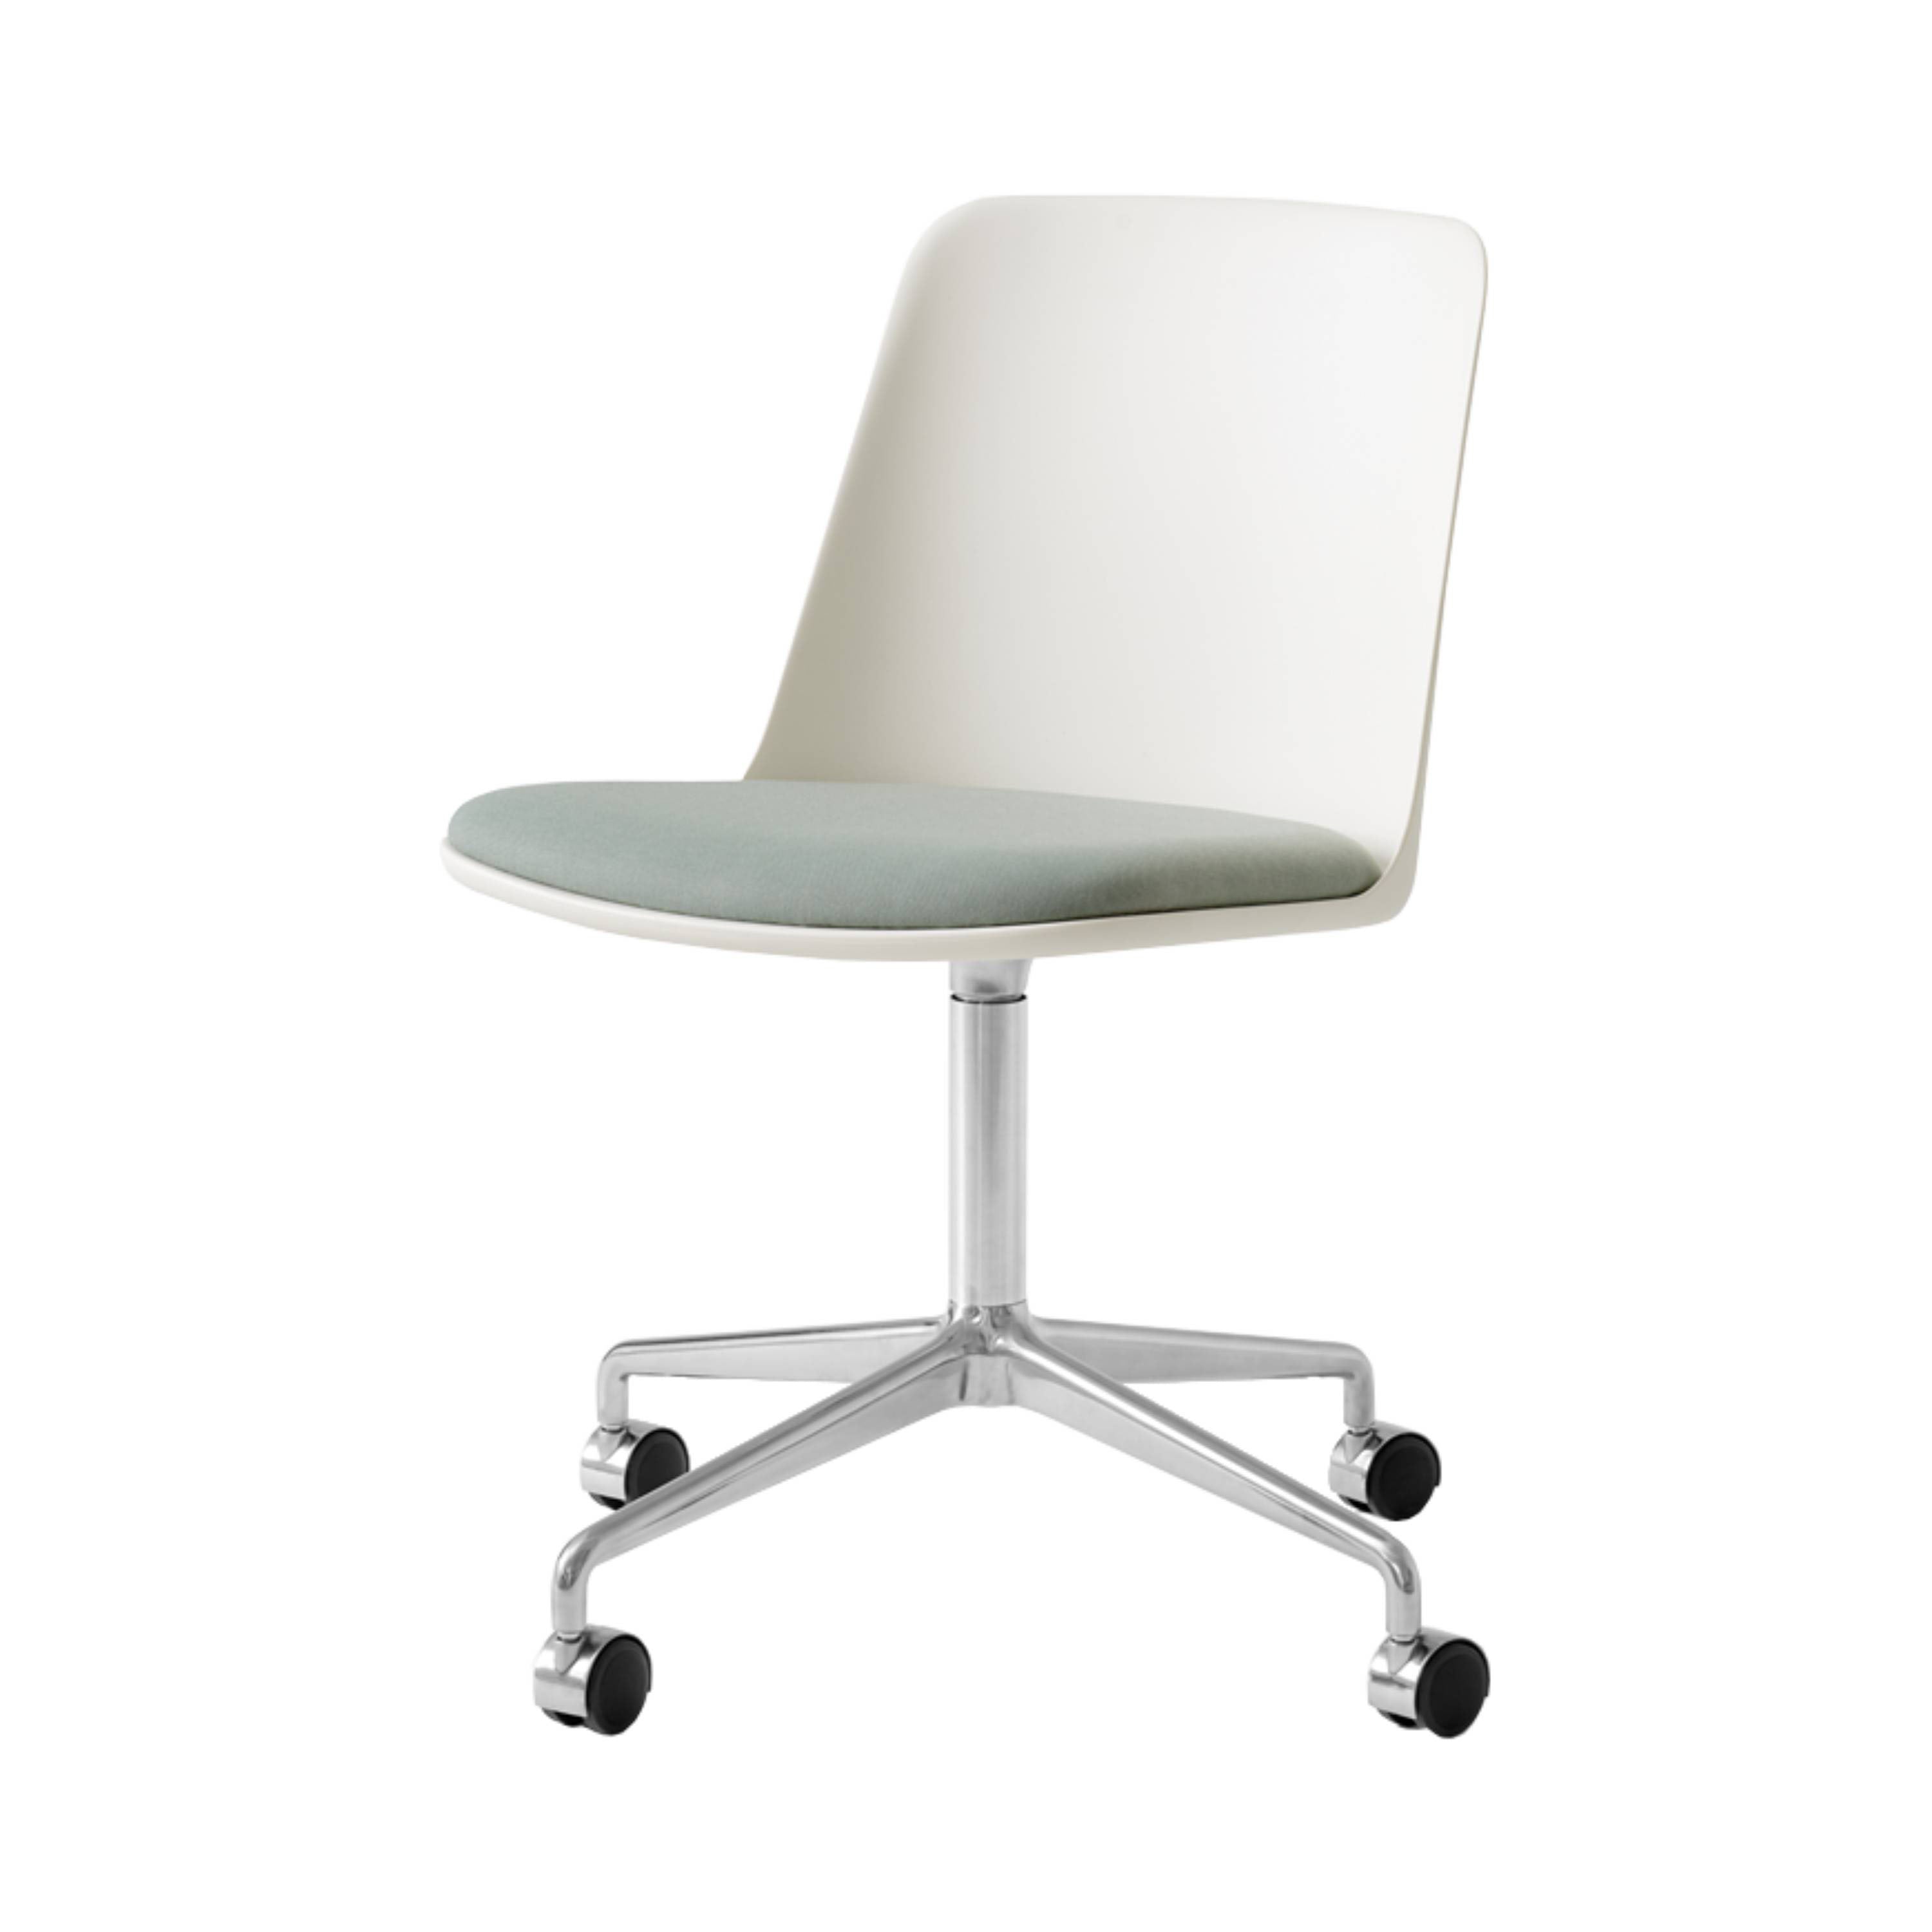 Rely Chair HW22: Polished Aluminum + White 